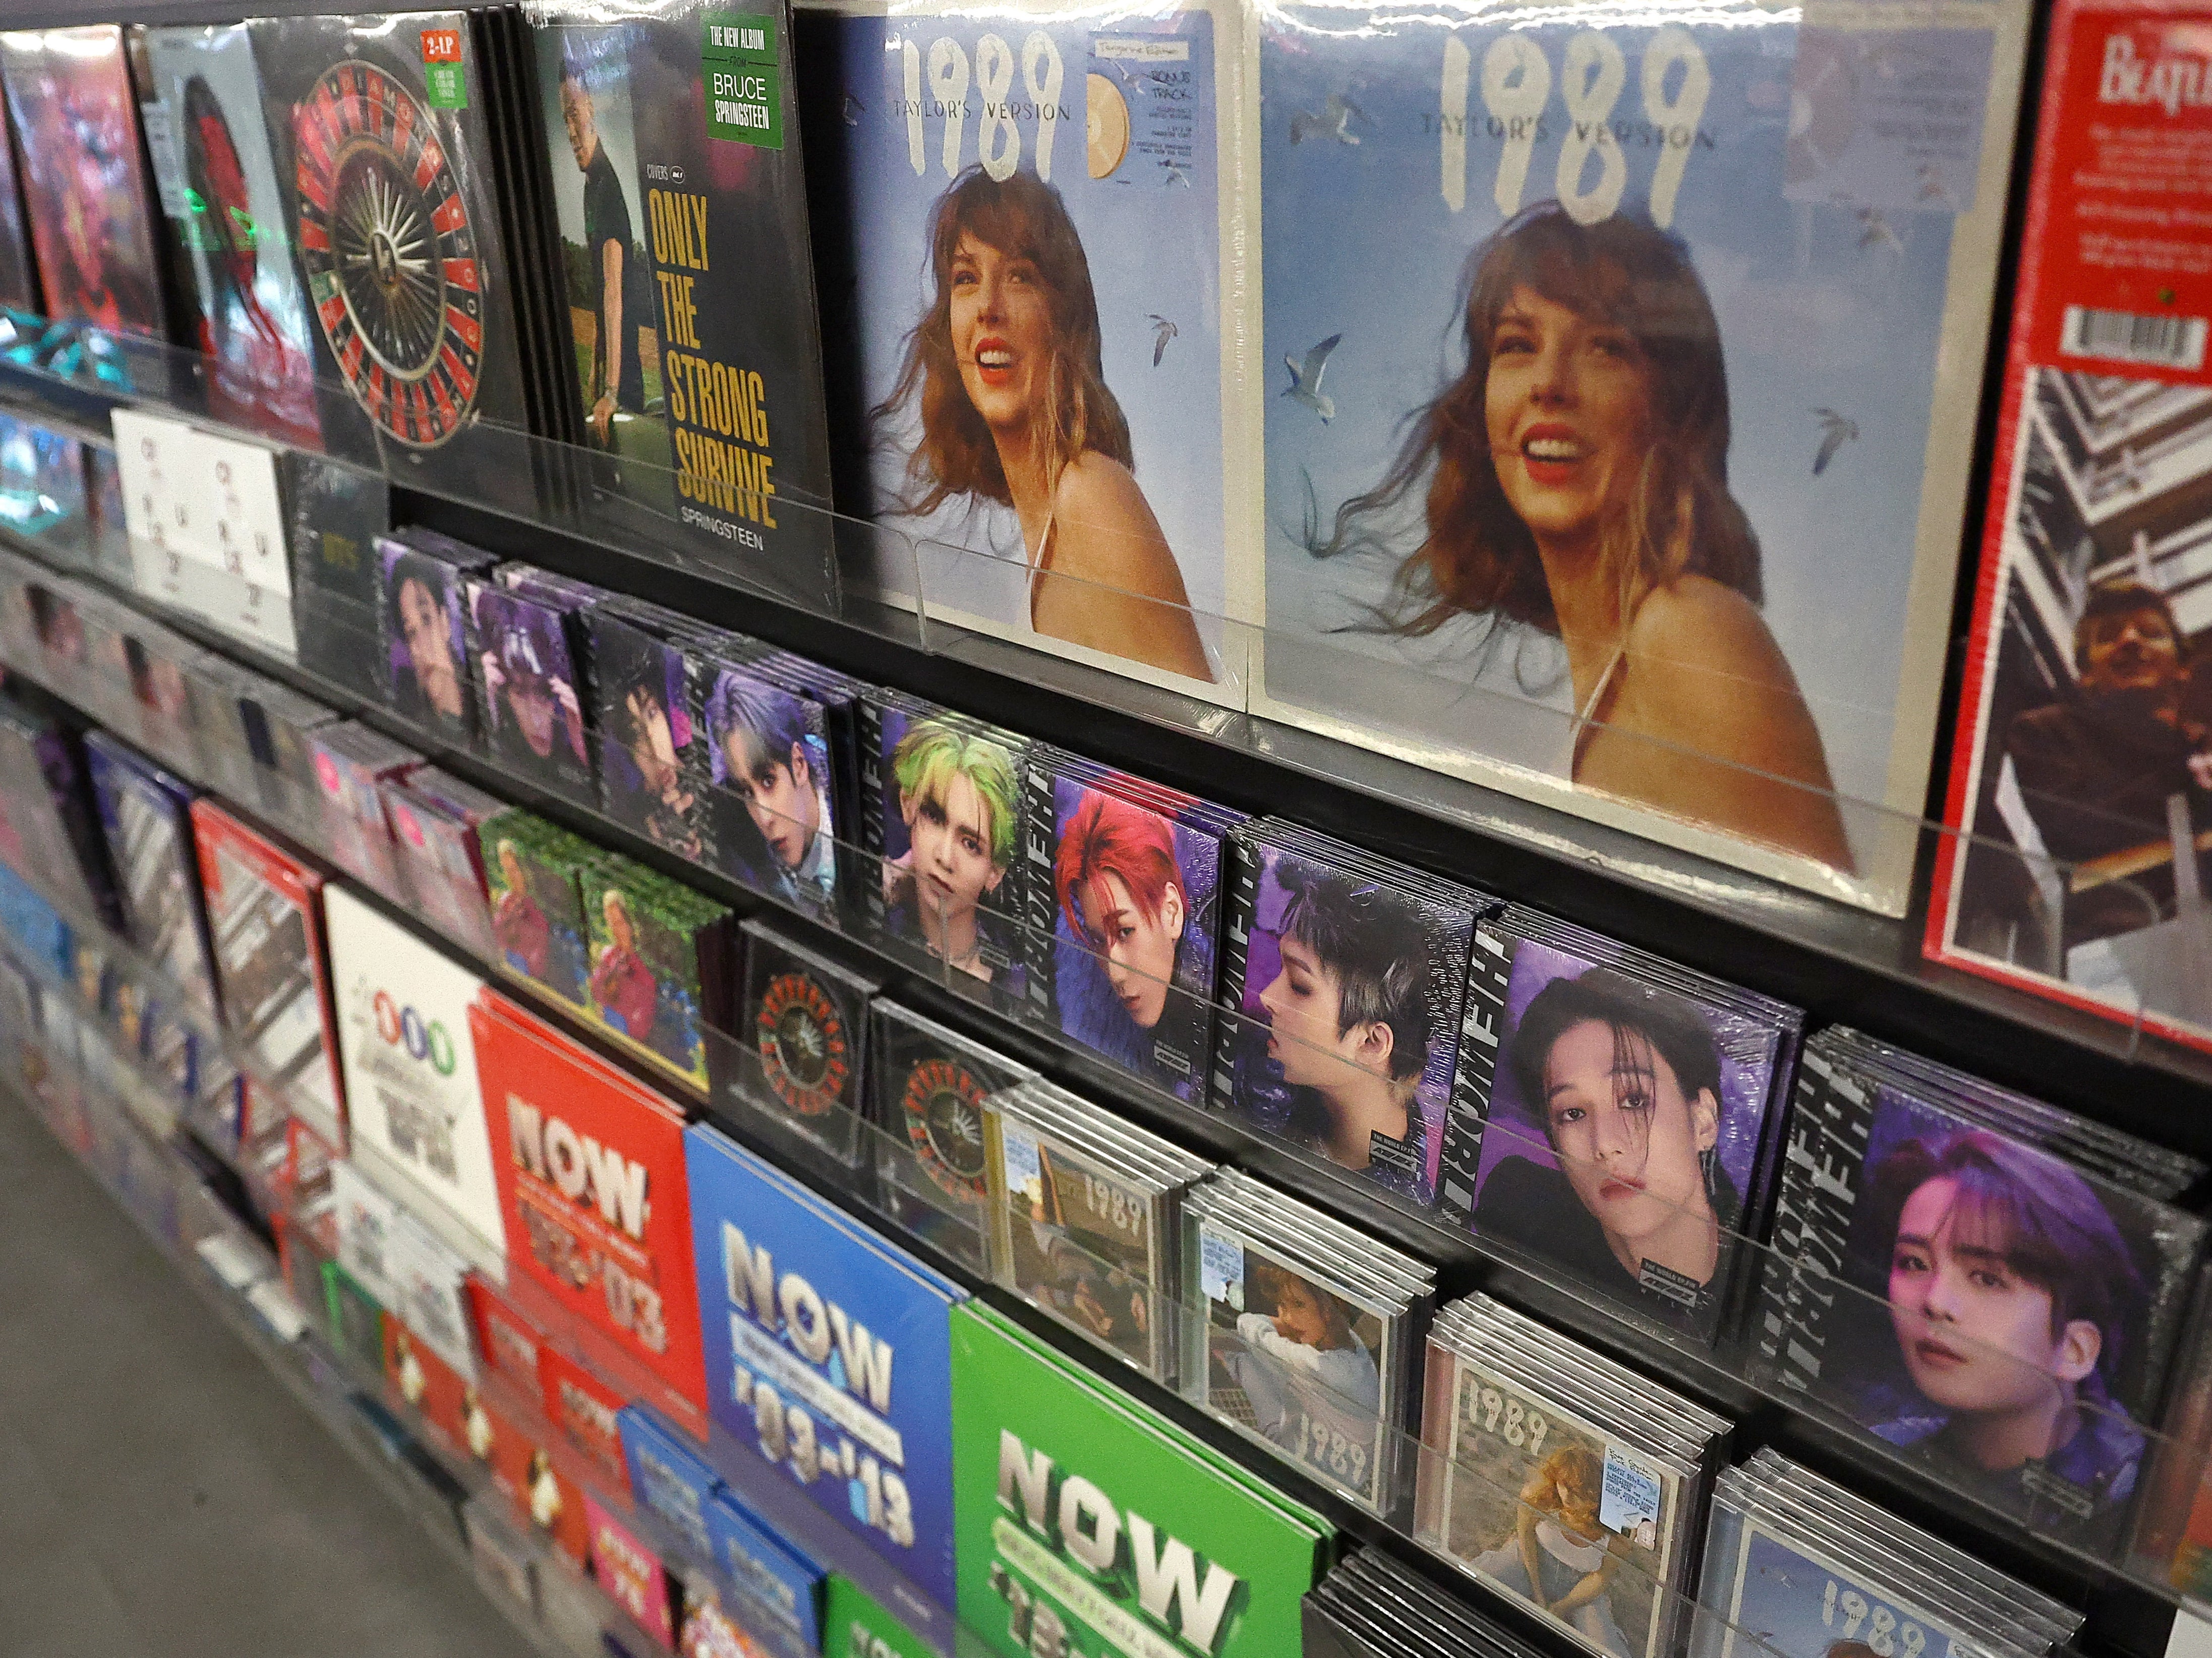 Copies of ‘1989 (Taylor’s Version)’ on display in record stores